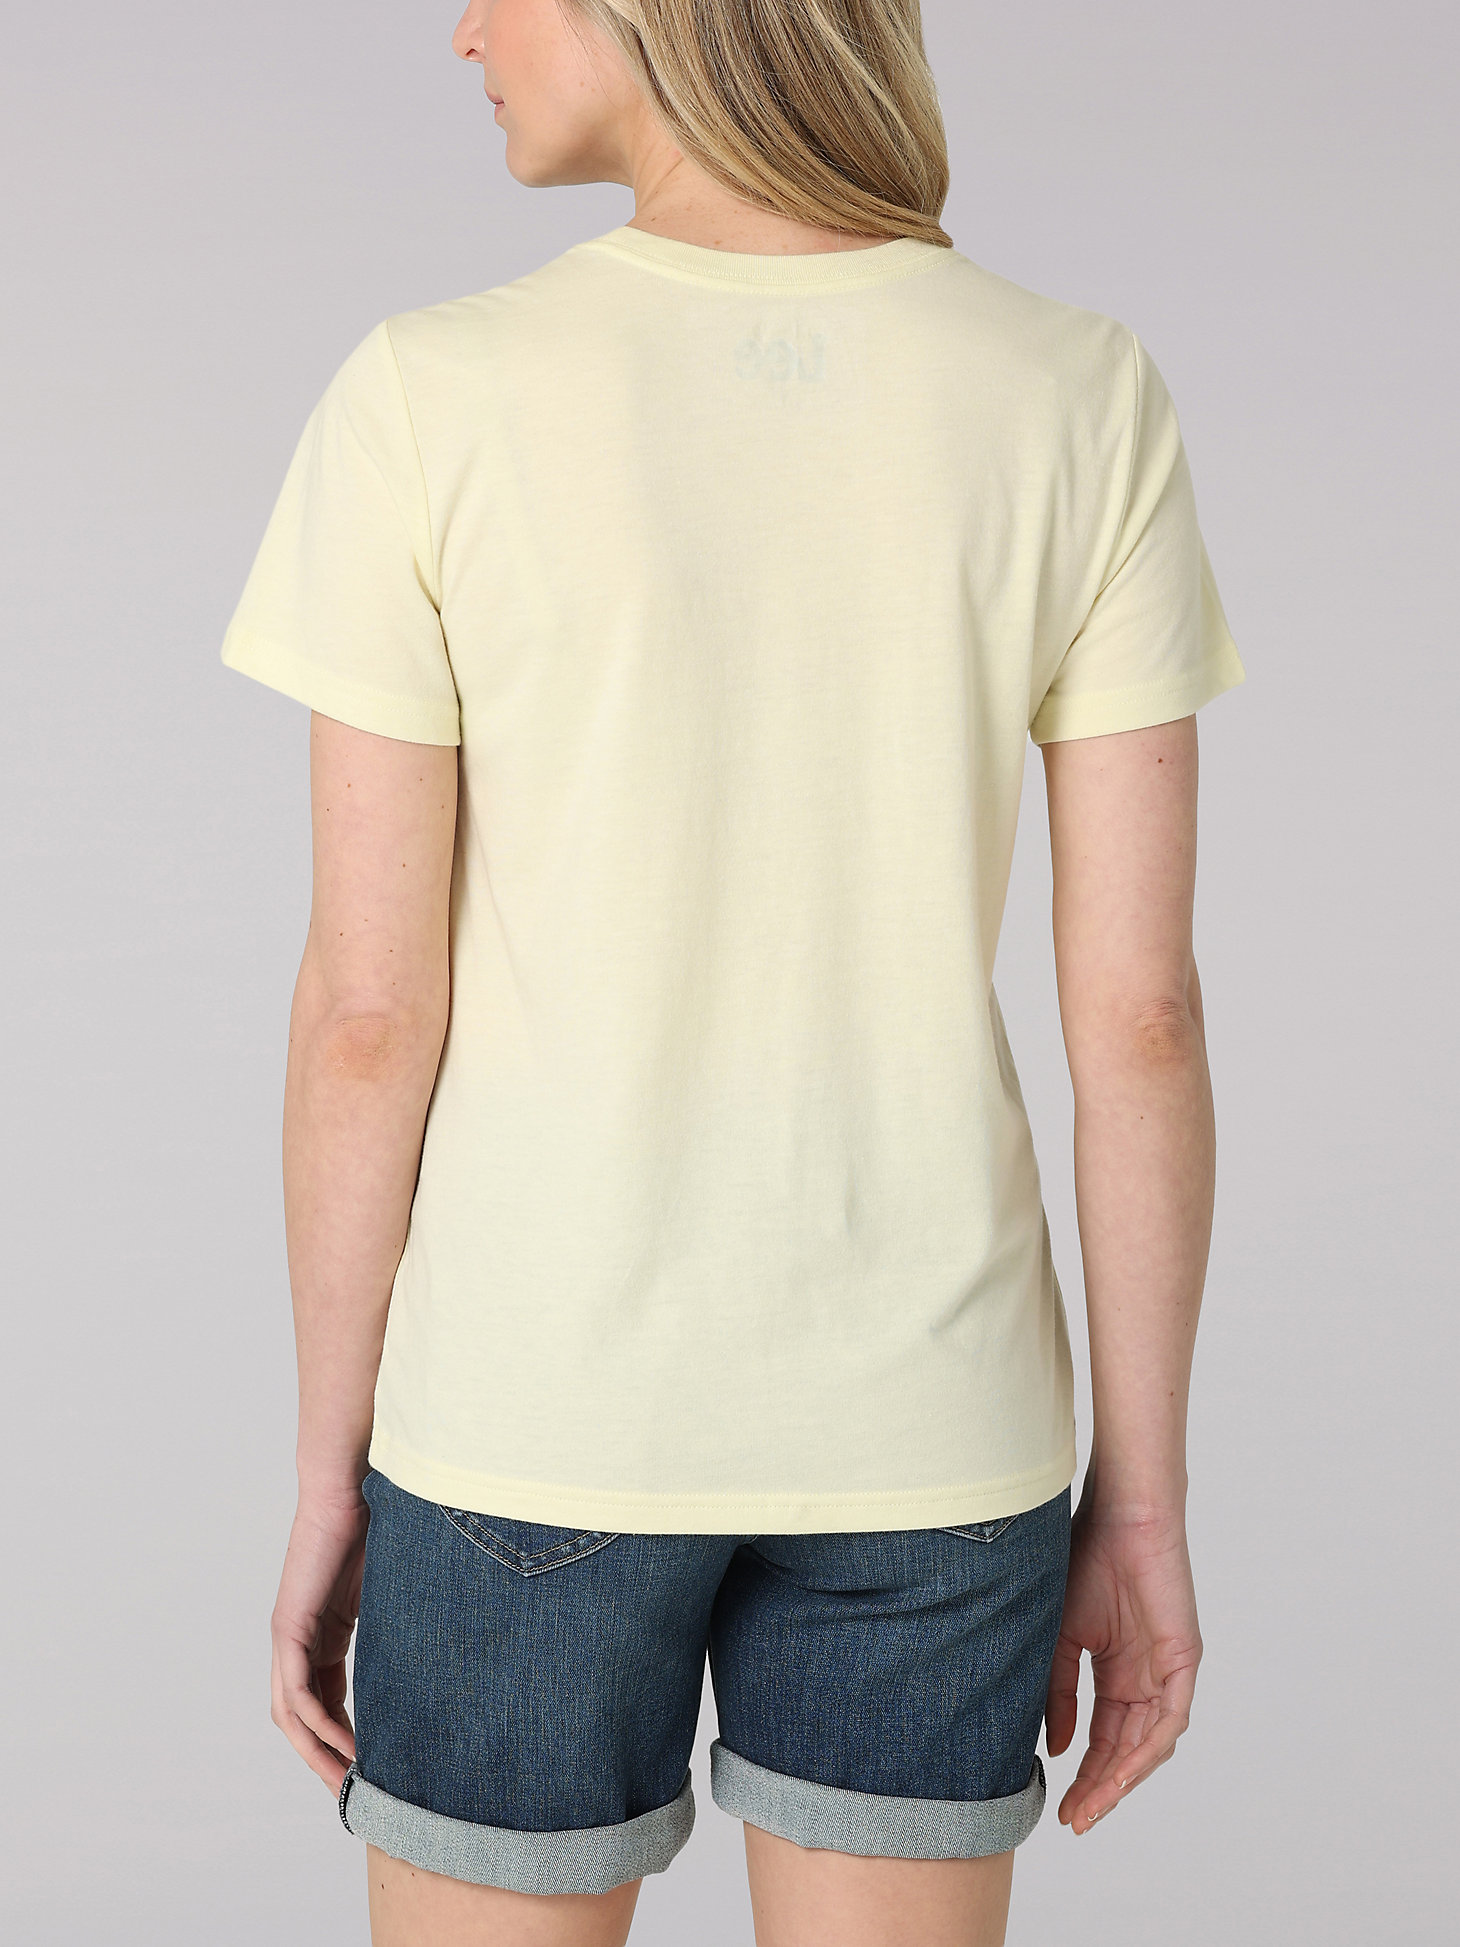 Women's Lee Cocktail Hour Graphic Tee in Sunwashed Heather alternative view 1